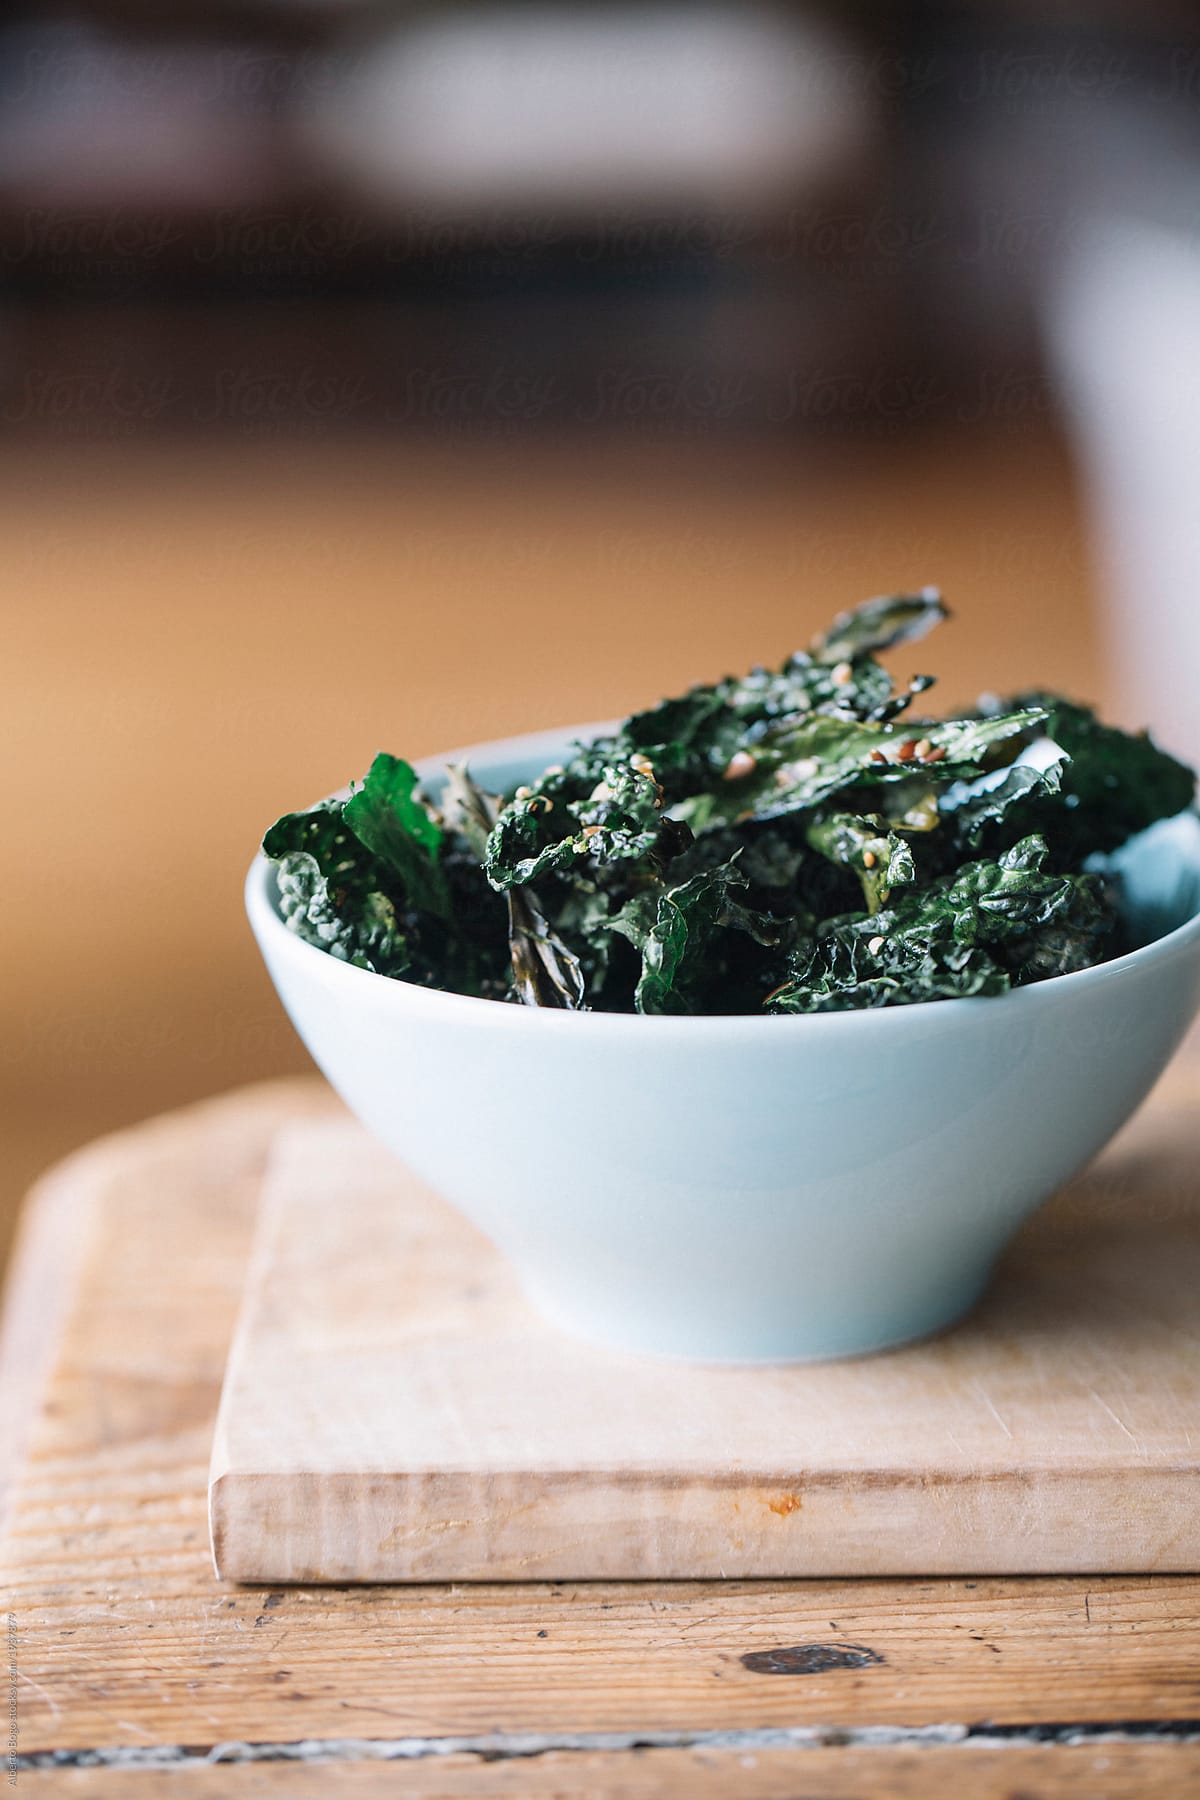 Chips made of green kale